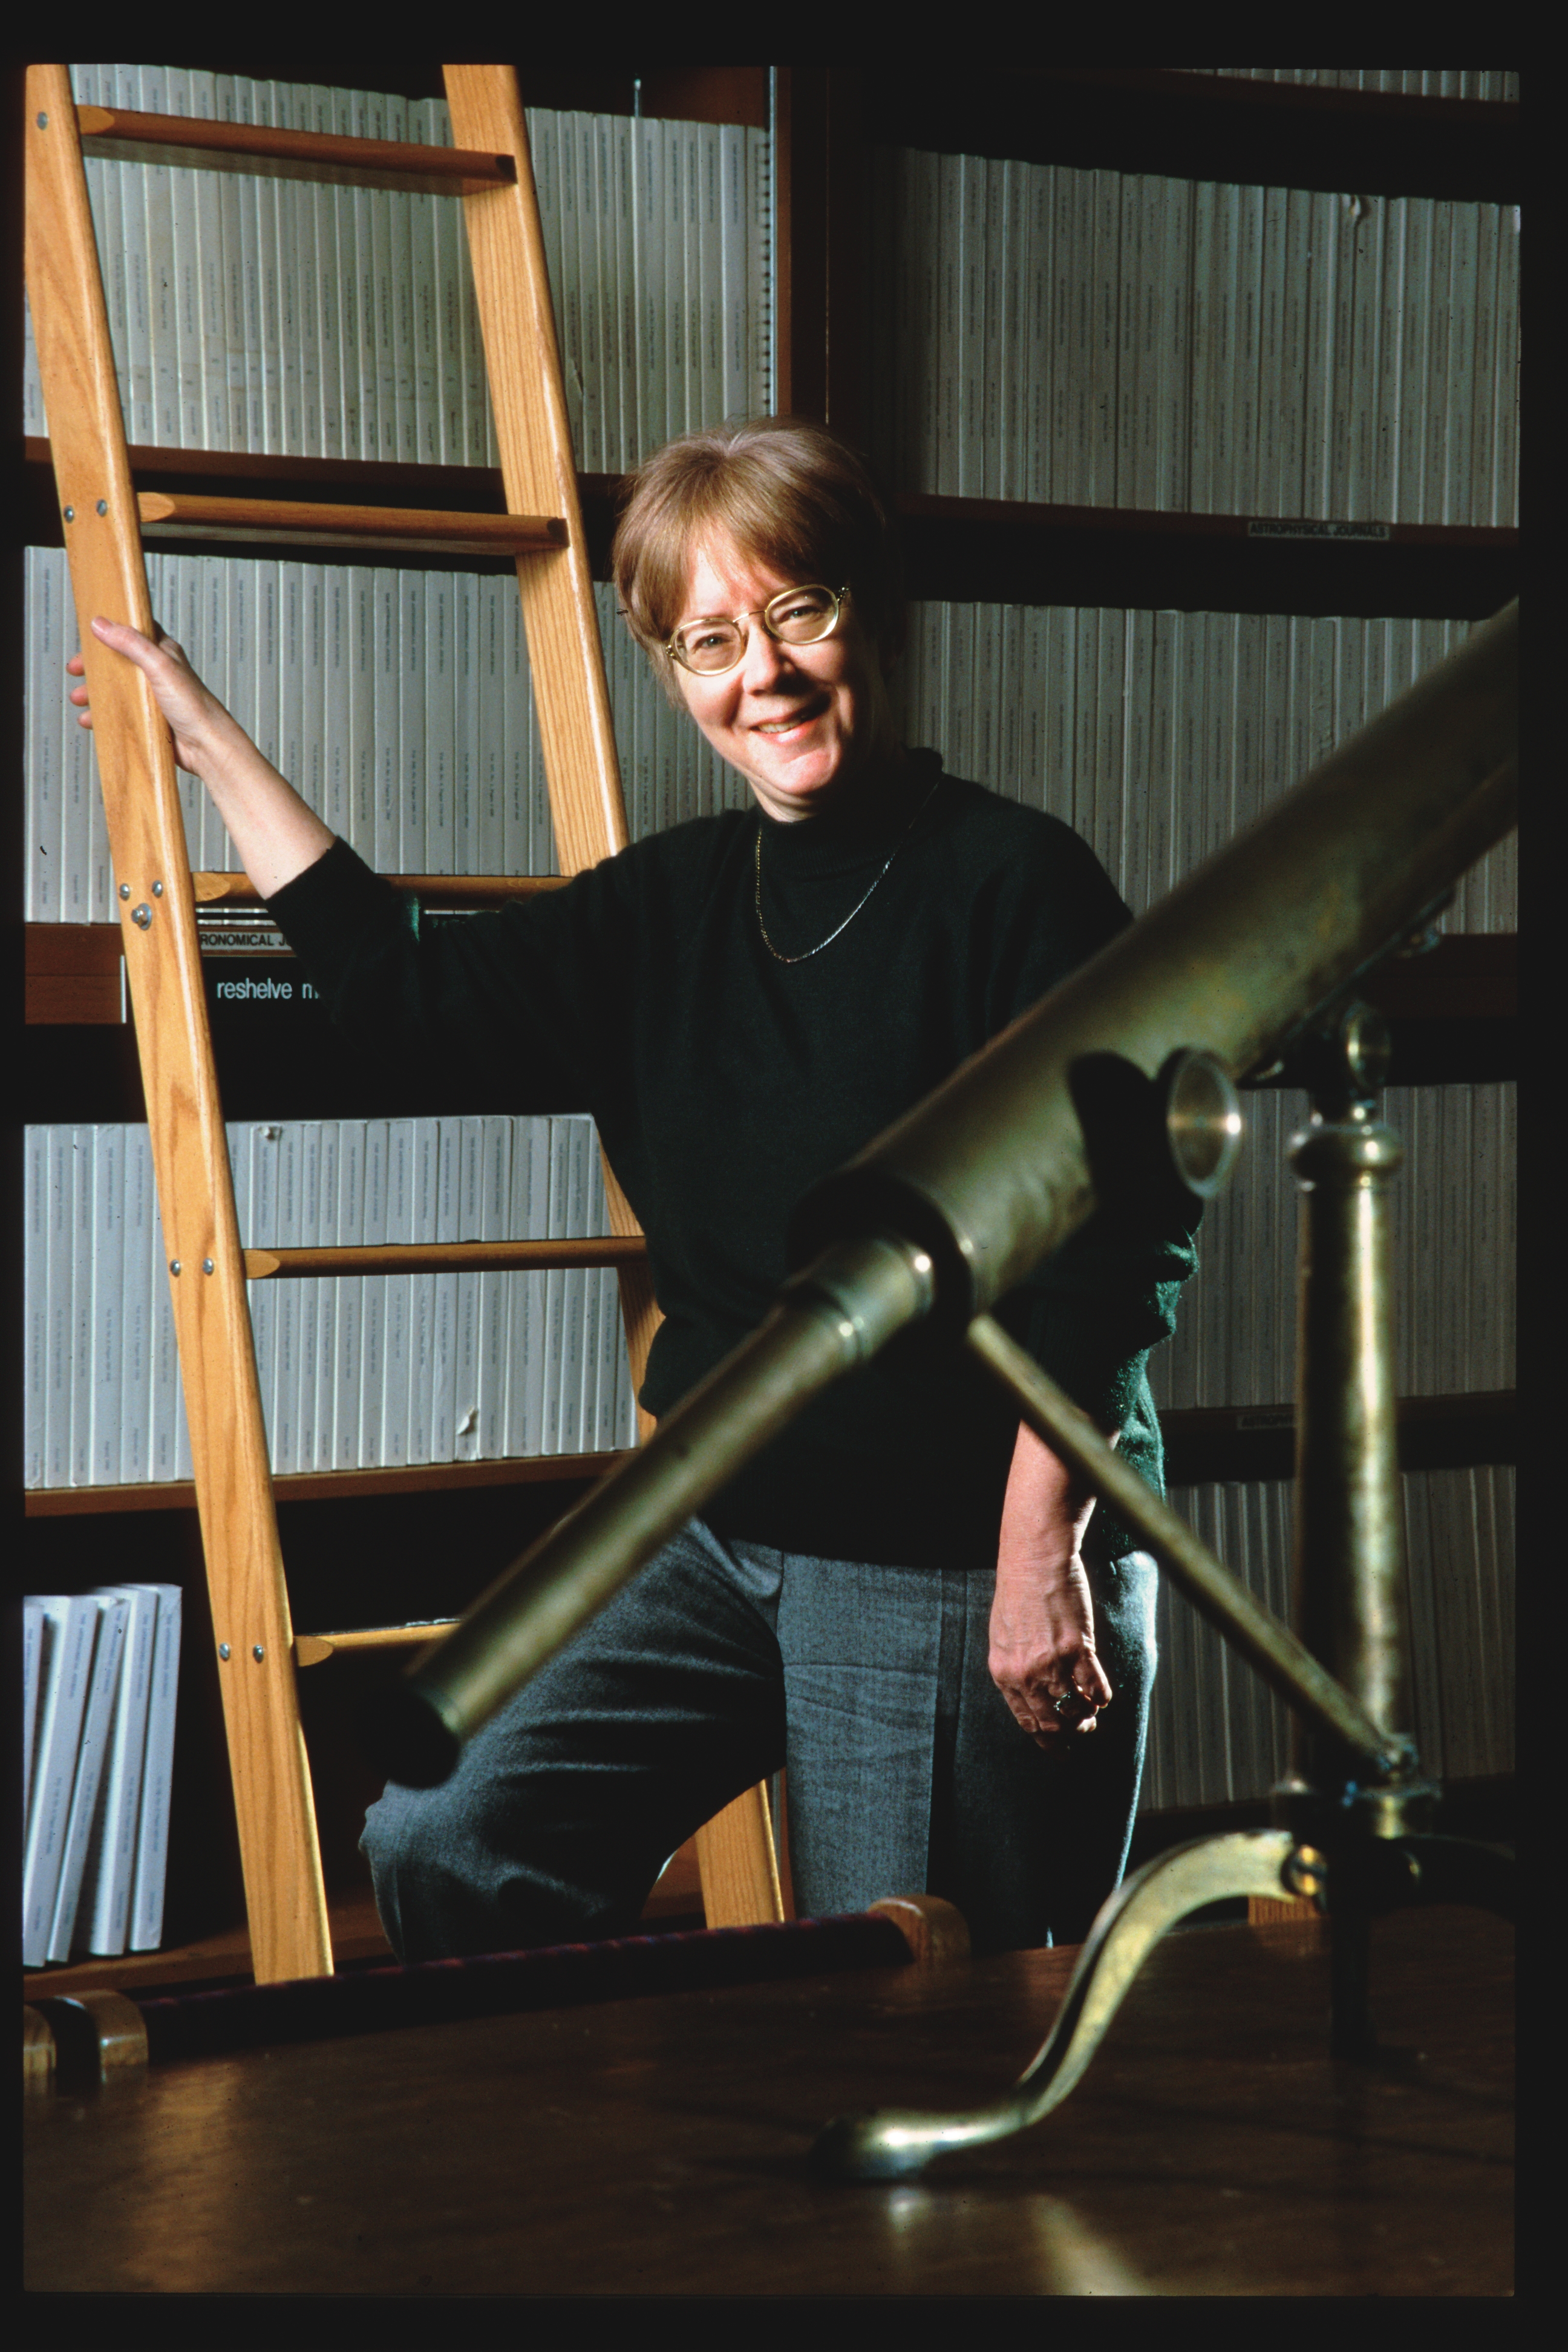 Smiling woman standing in front of a library holding onto a ladder. There is a telescope in the foreground.